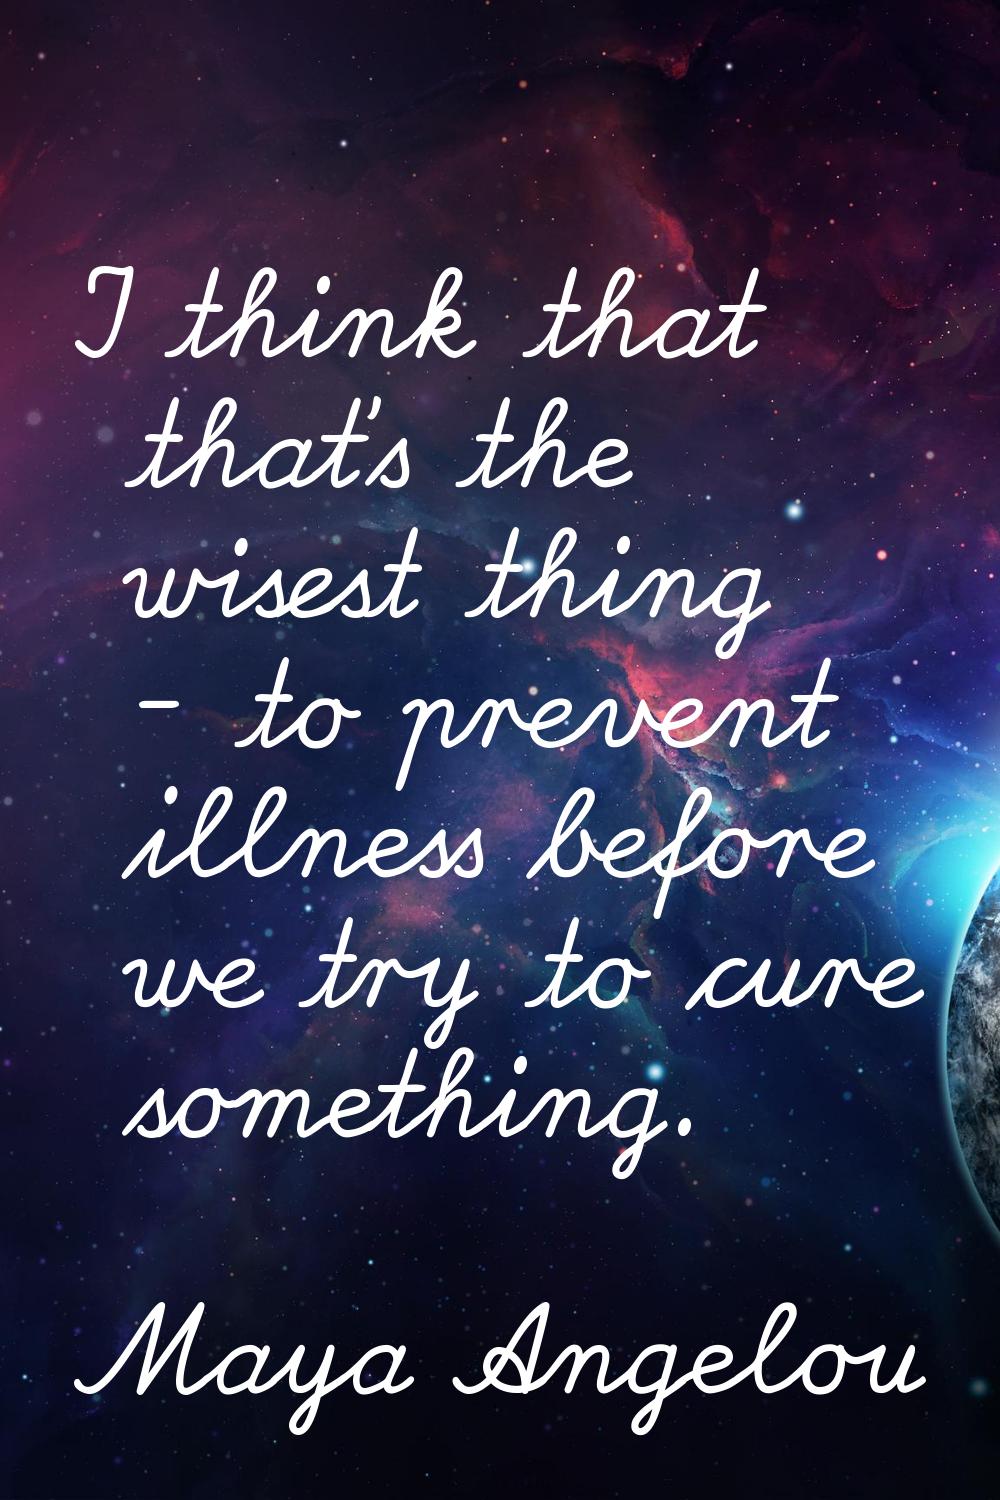 I think that that's the wisest thing - to prevent illness before we try to cure something.